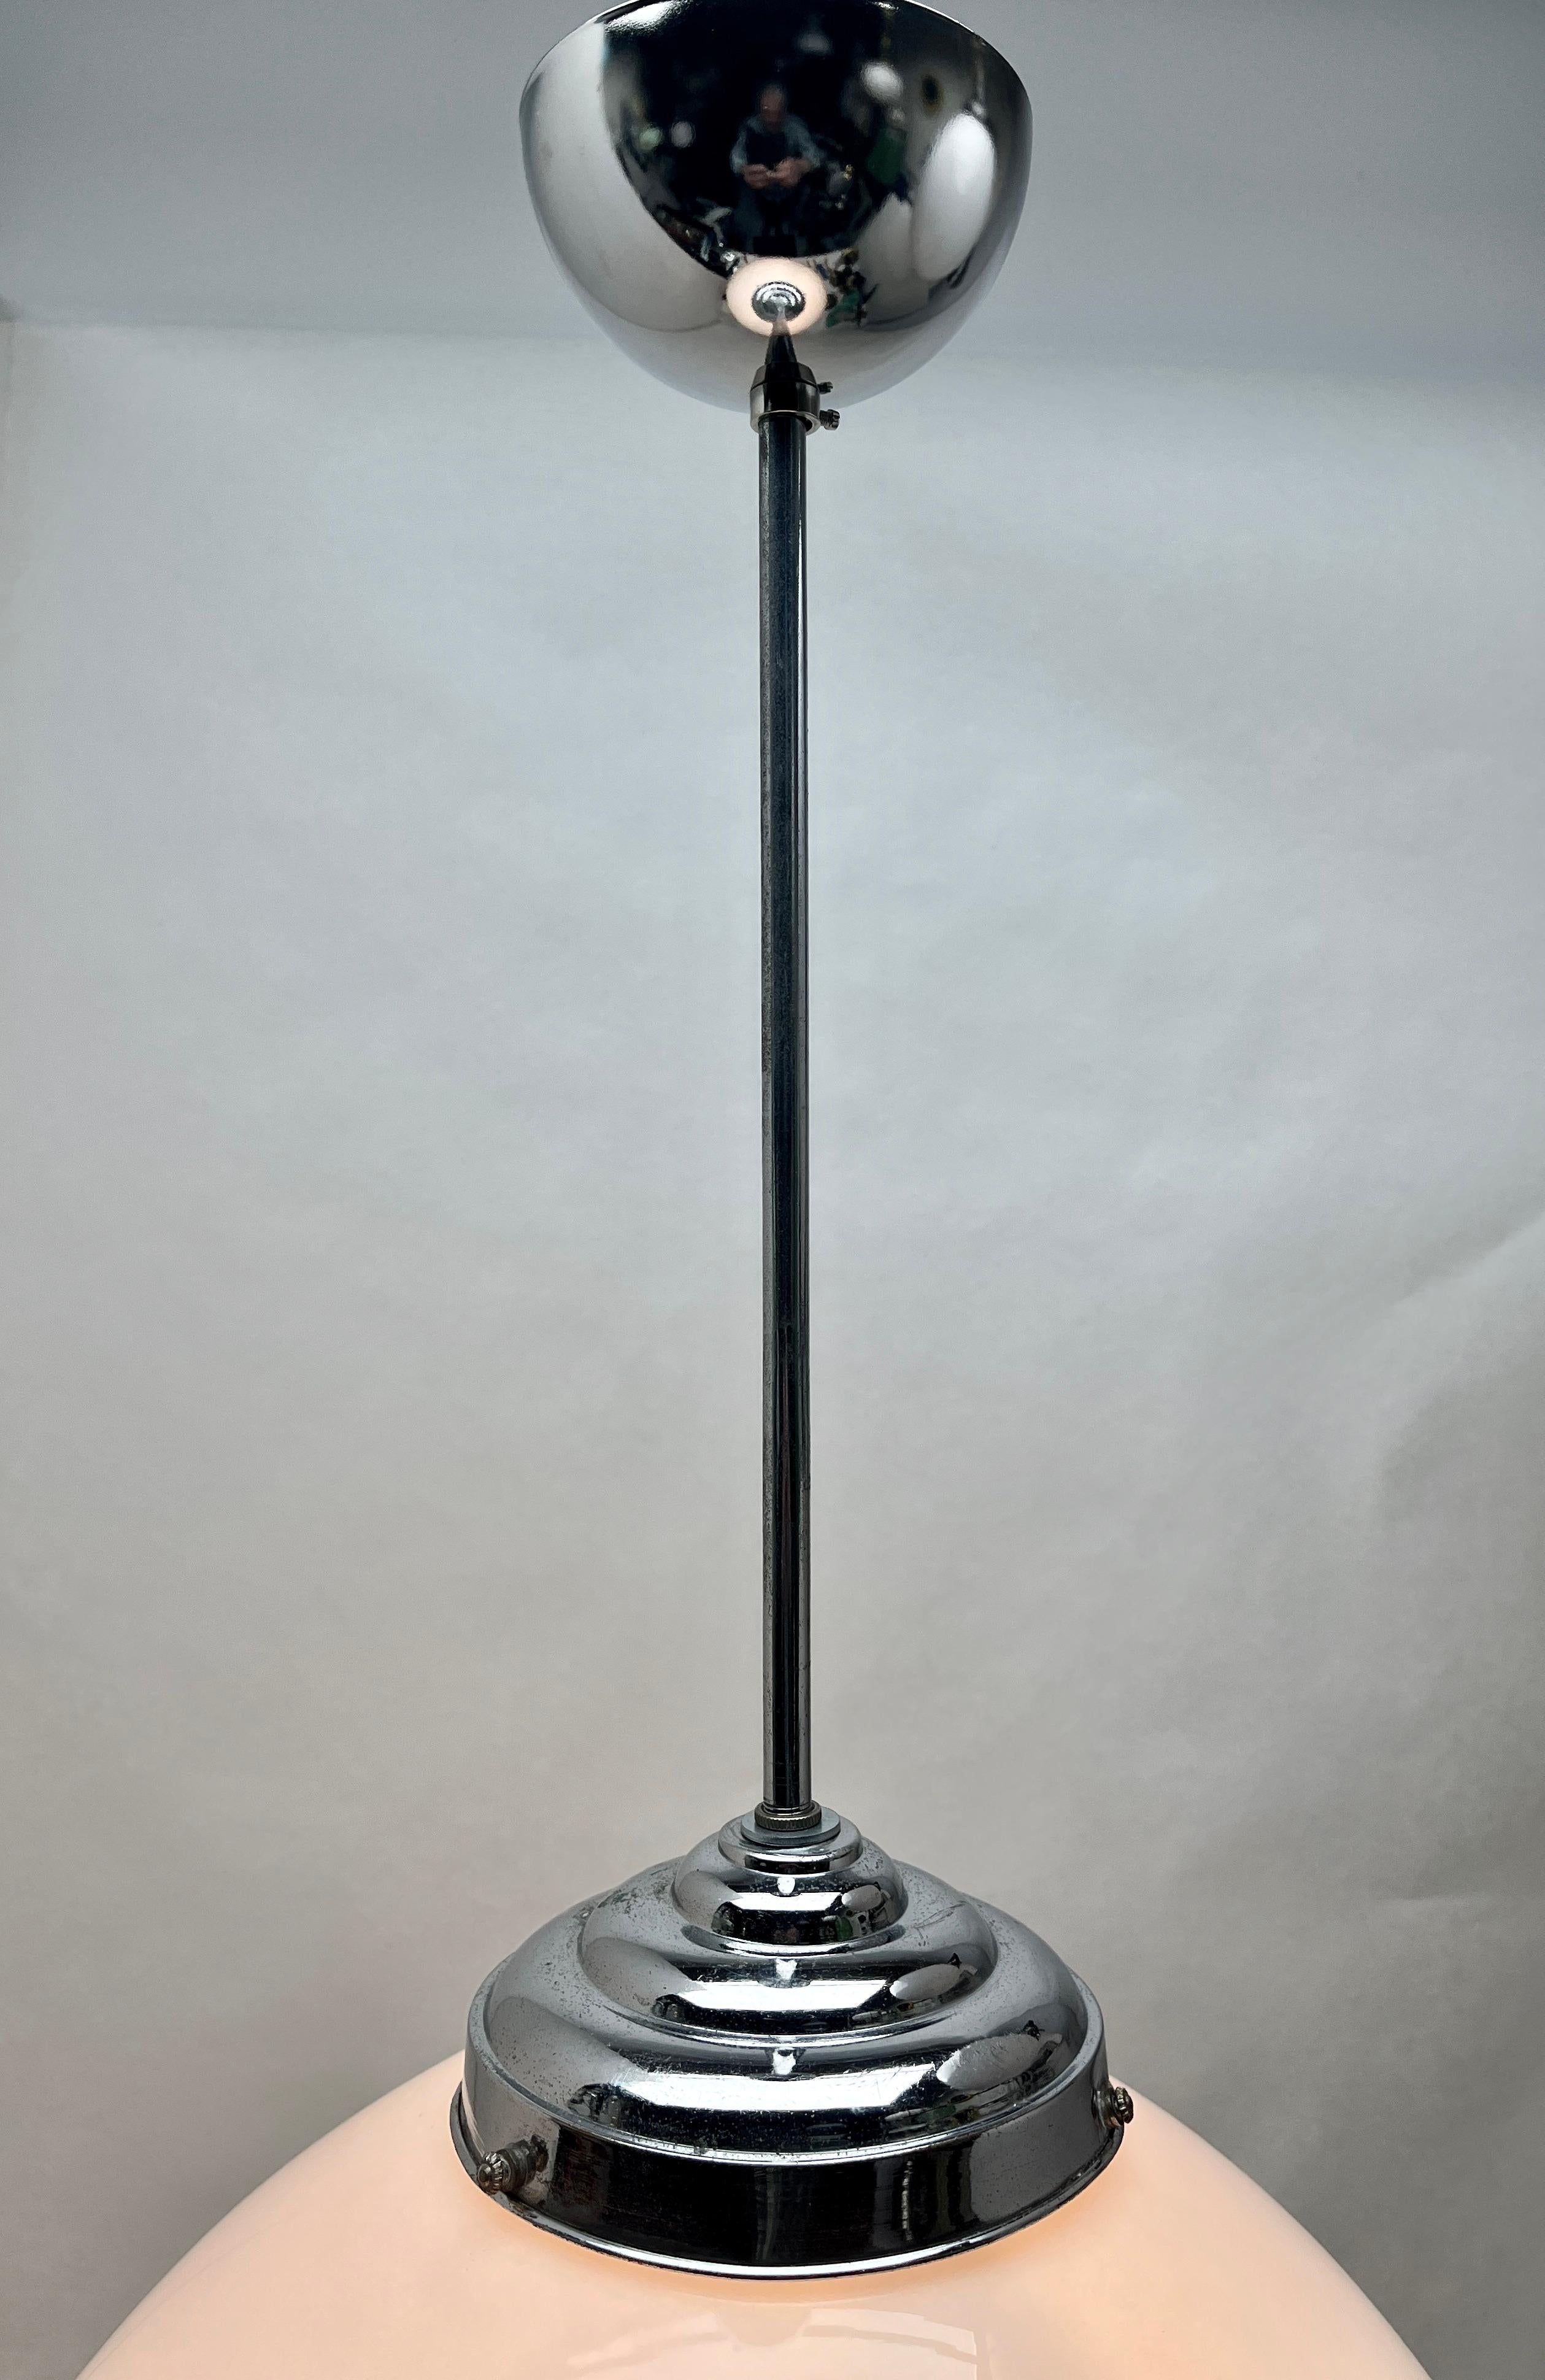 Phillips Pendant Stem Lamp with a Globular Opaline Shade, 1930s, Netherlands In Good Condition For Sale In Verviers, BE